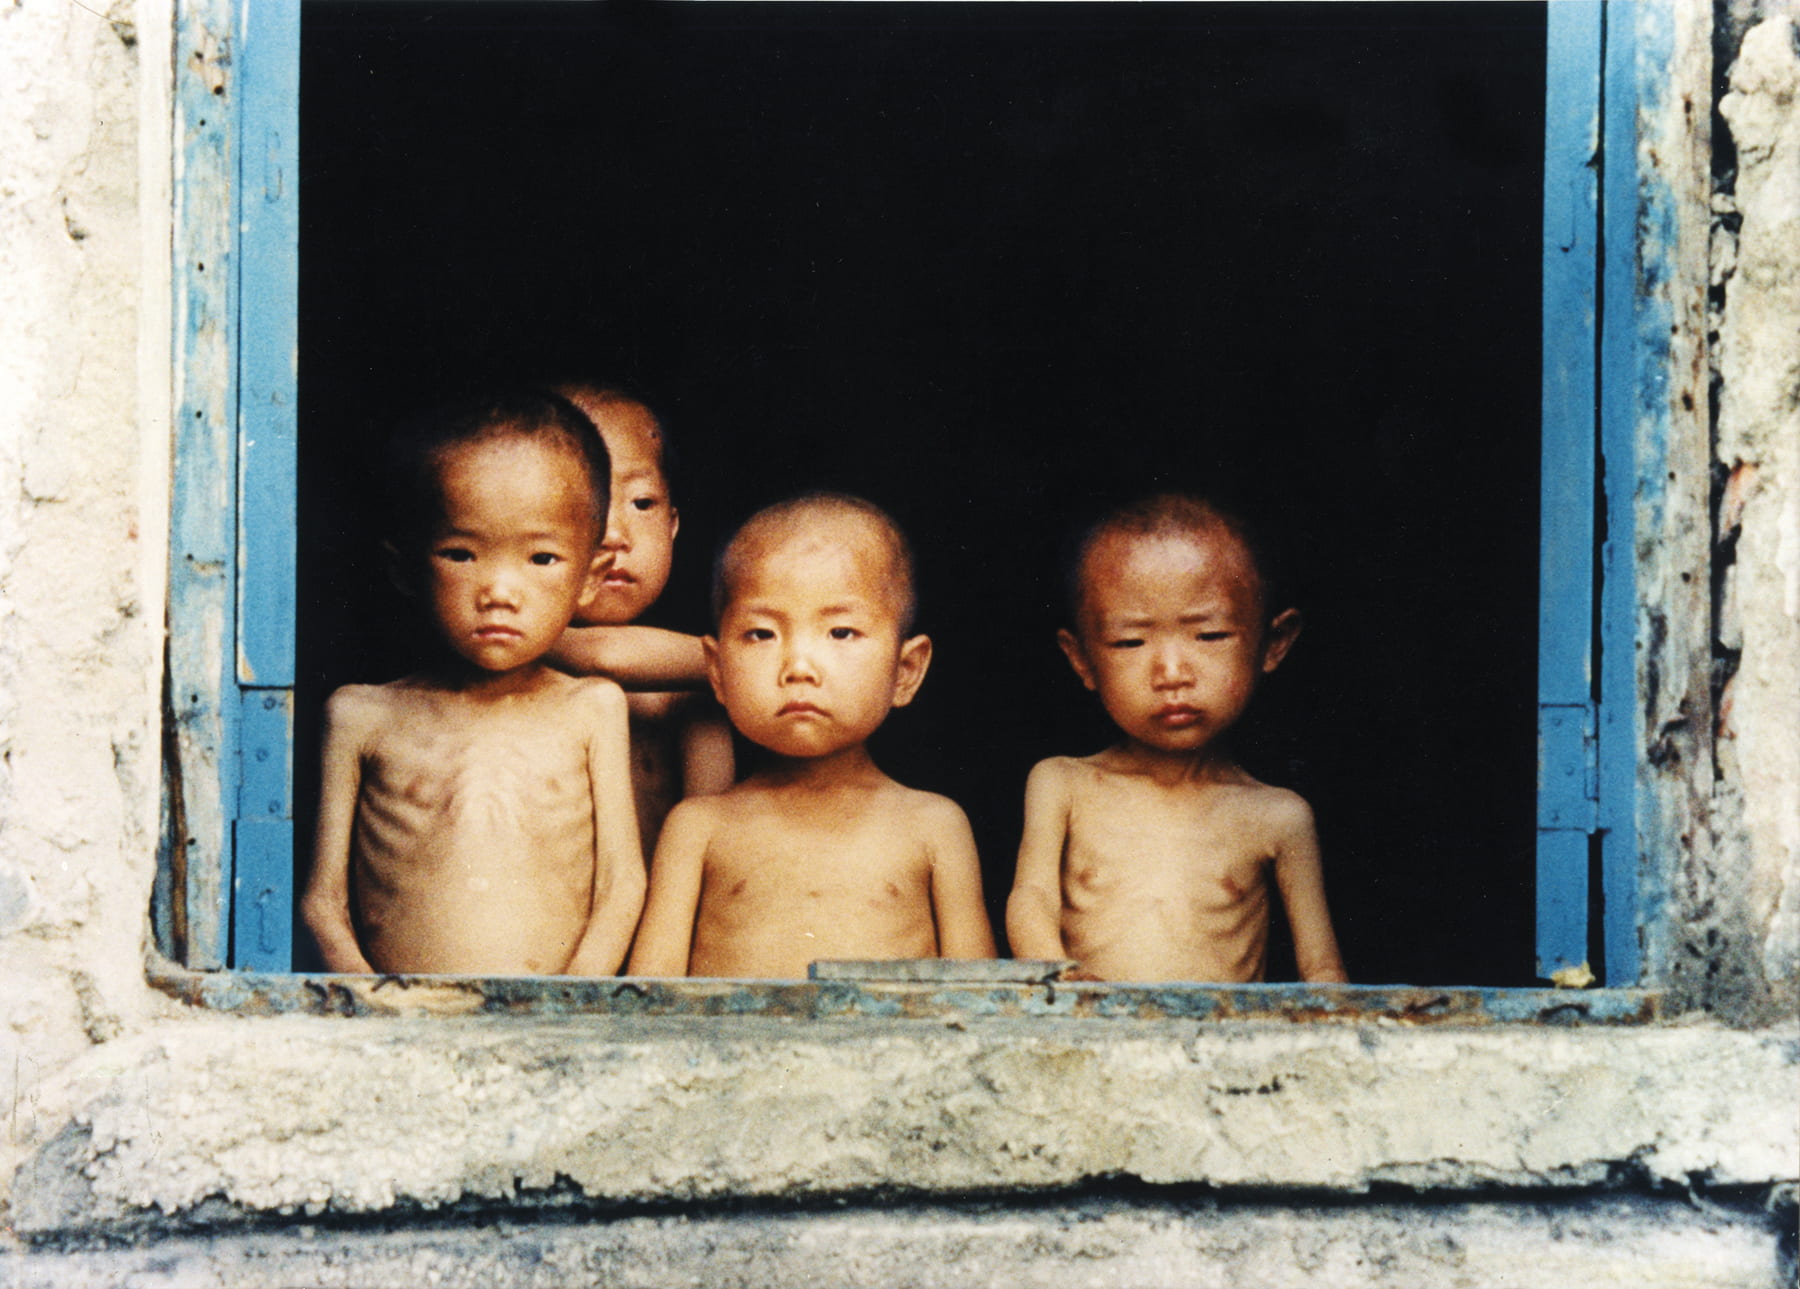 Four young Korean children stare sorrowfully through an open window with blue doors. Their ribs are visible and their arms are skinny.